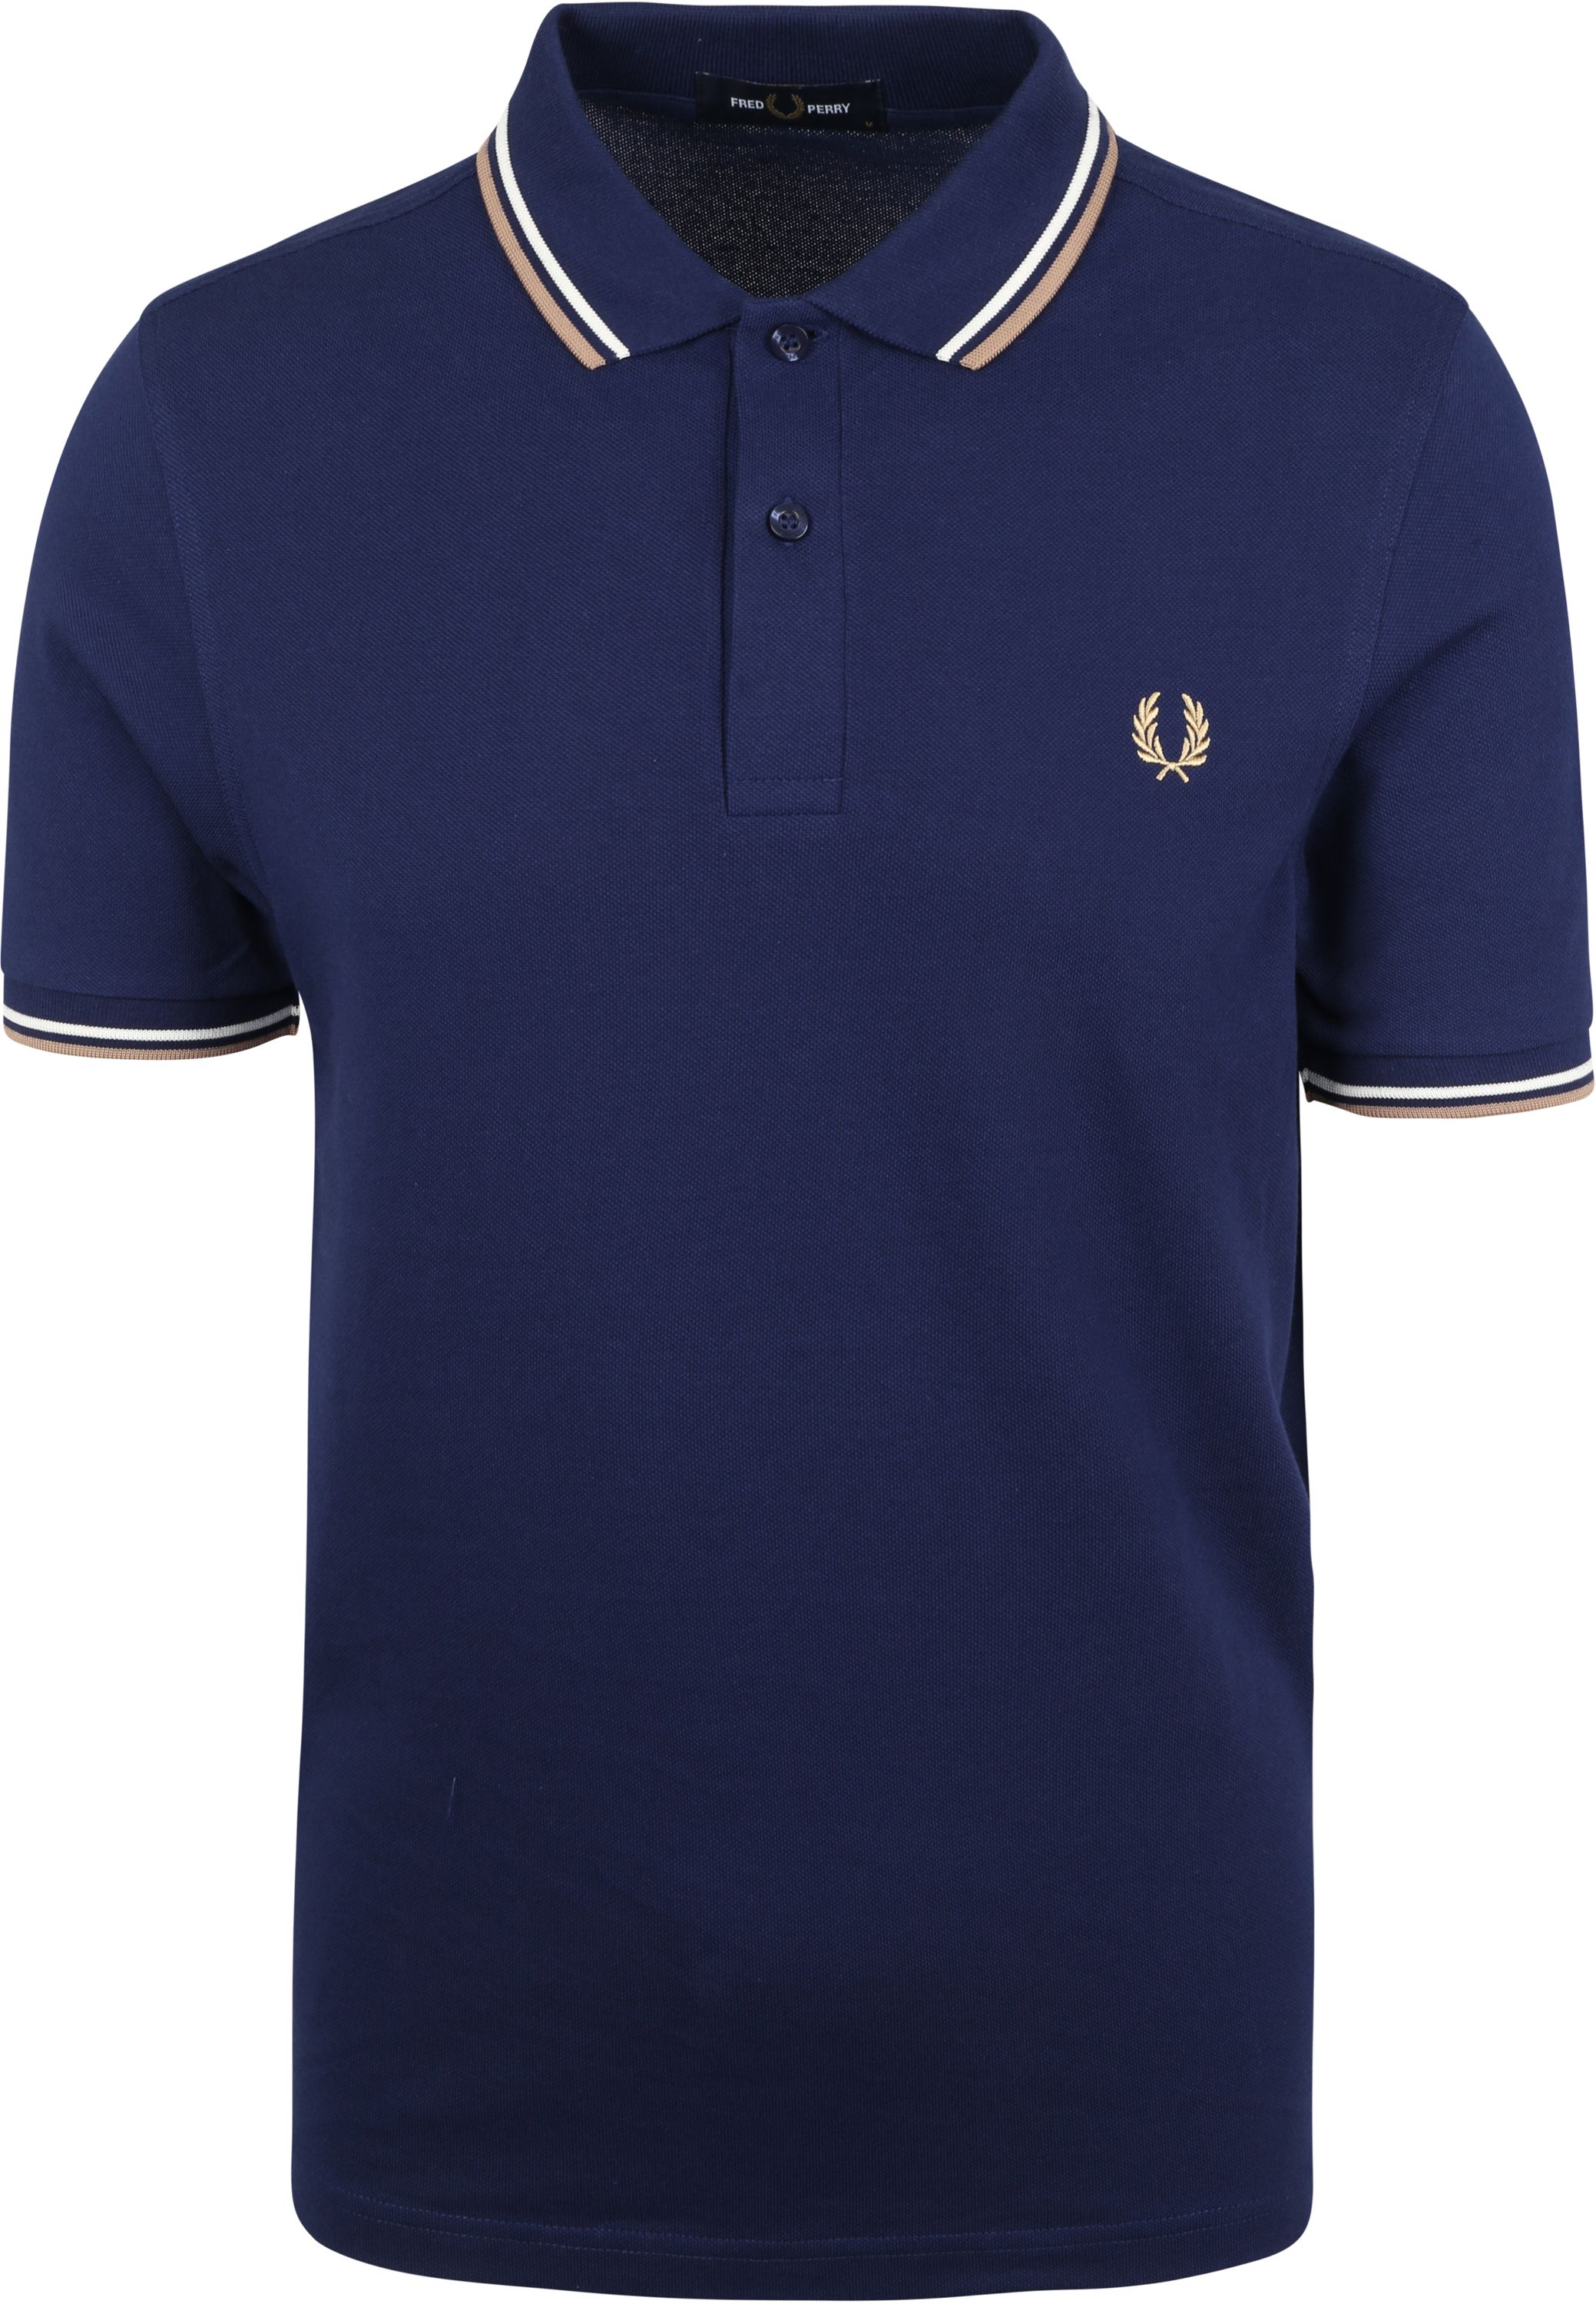 Fred Perry Polo Shirt Twin Tipped M3600 Navy Dark Blue Blue size L